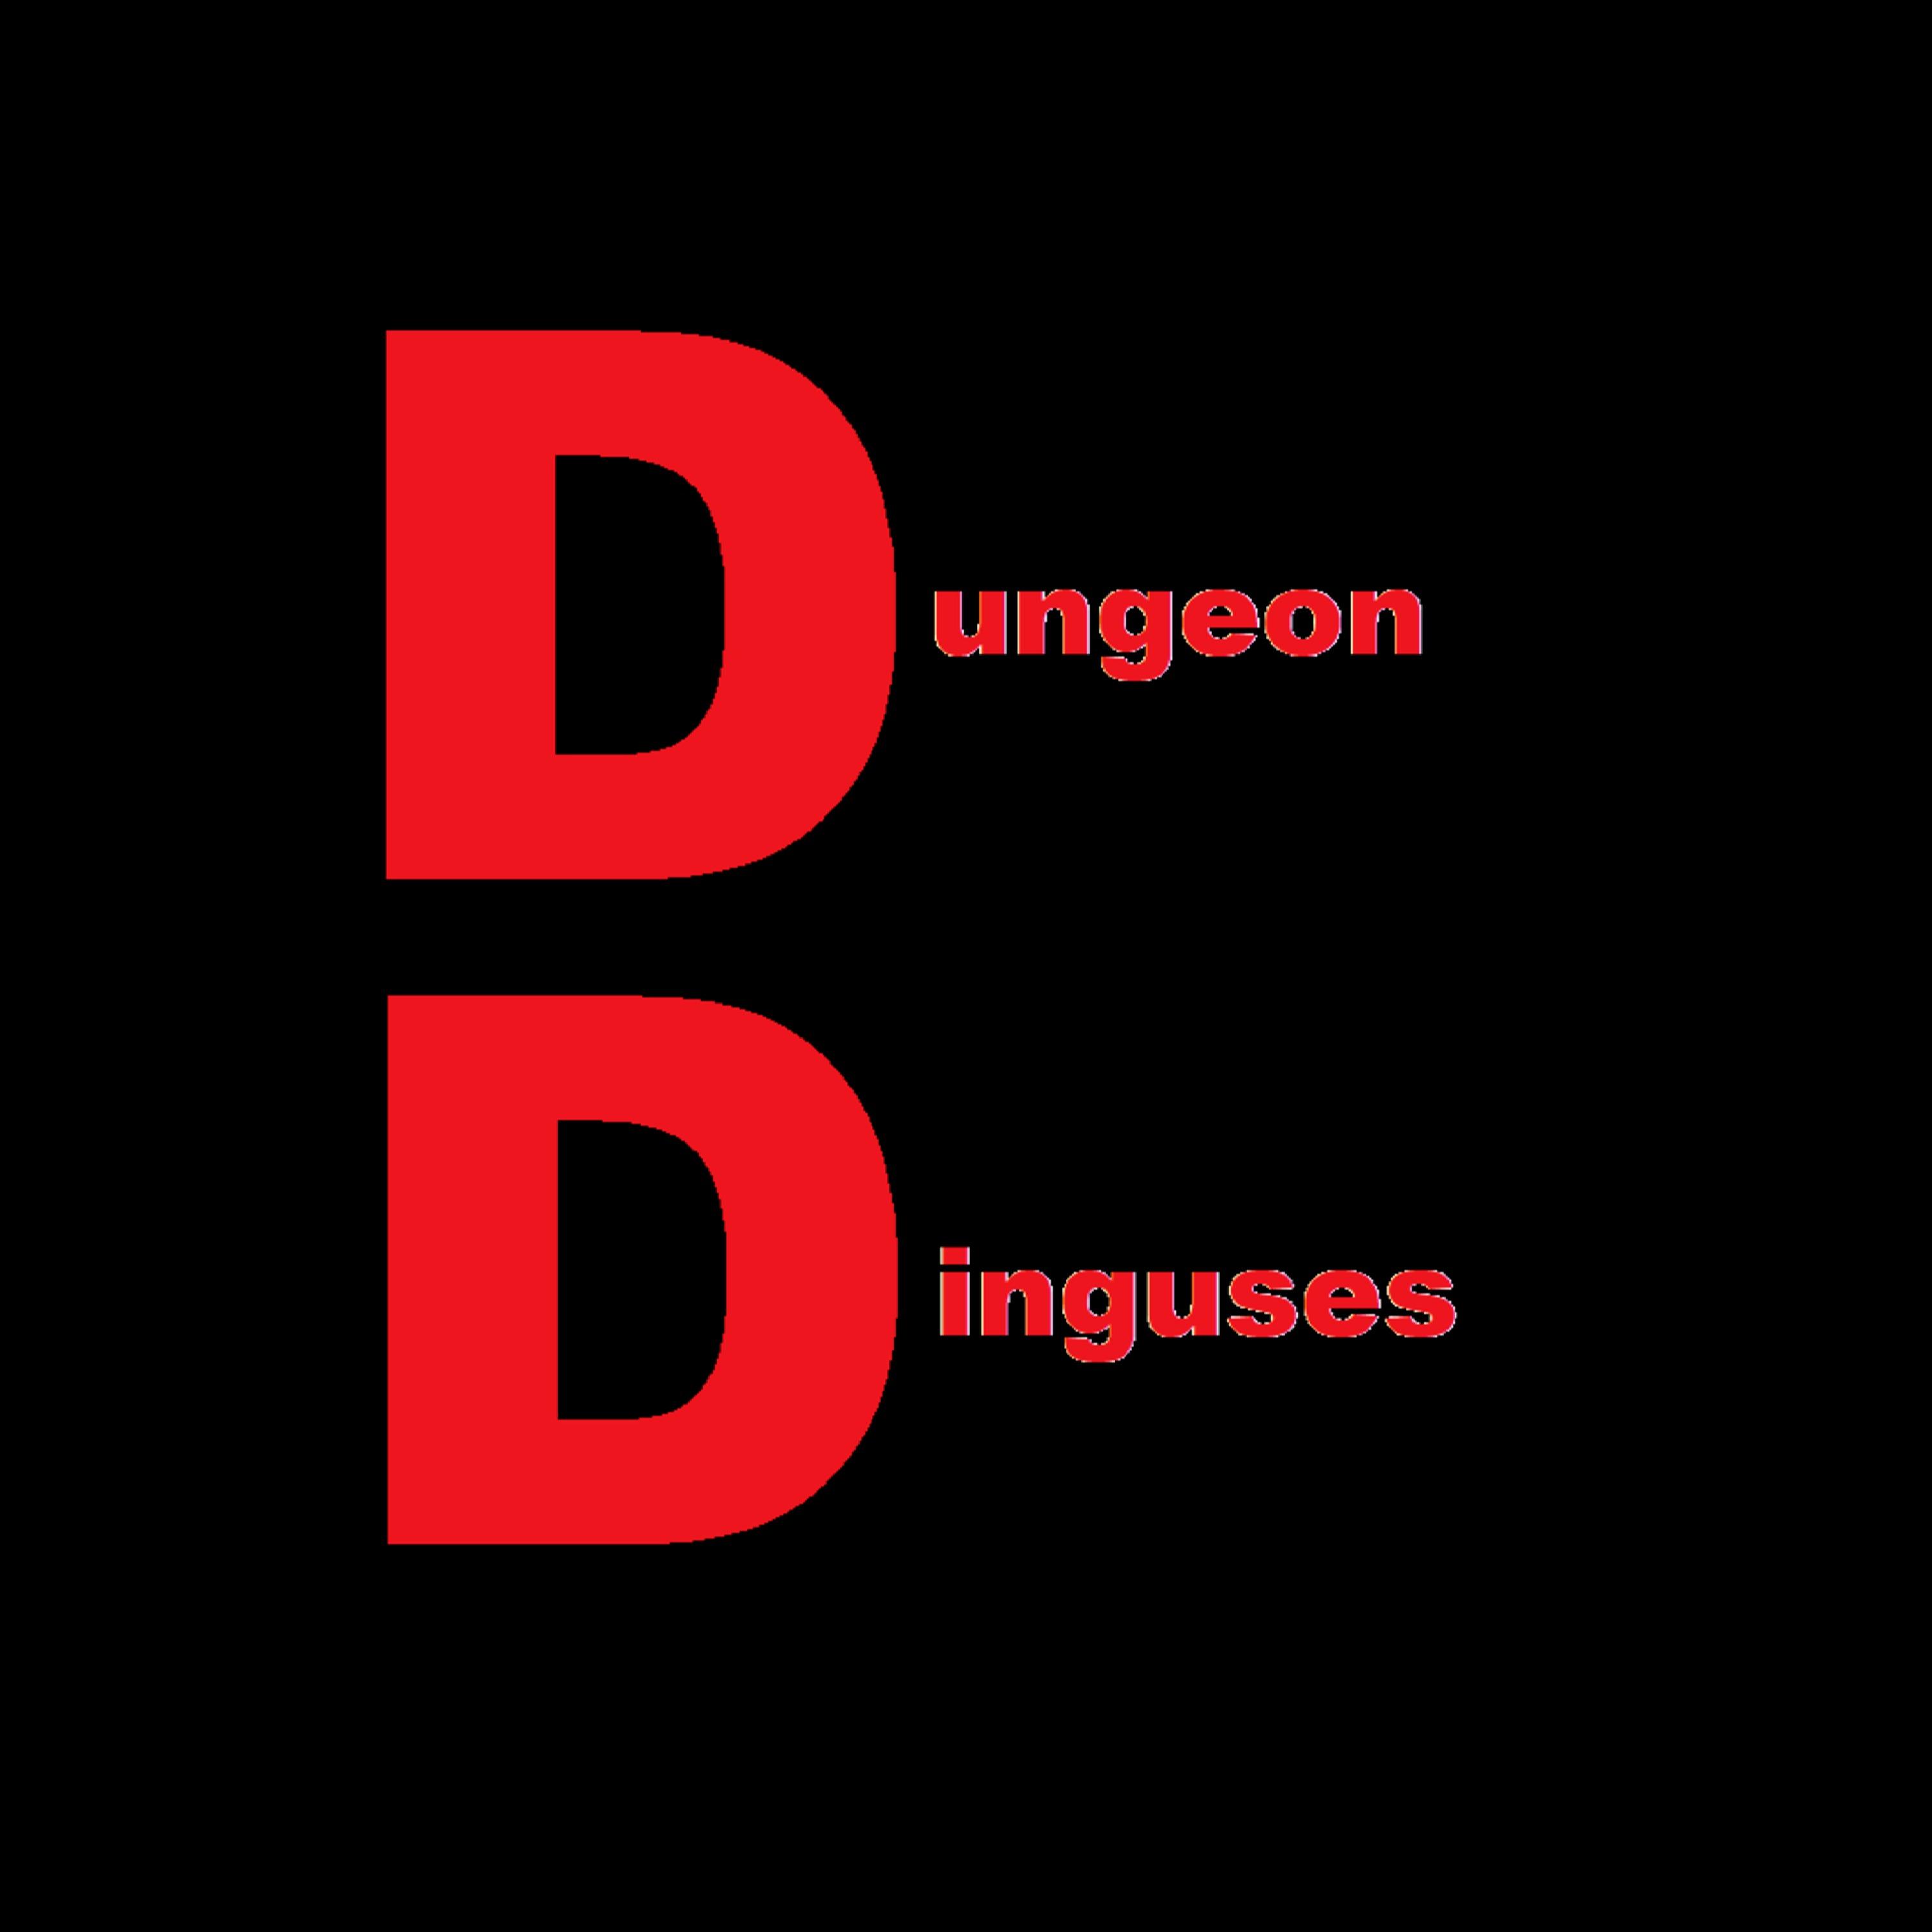 Dungeon Dinguses